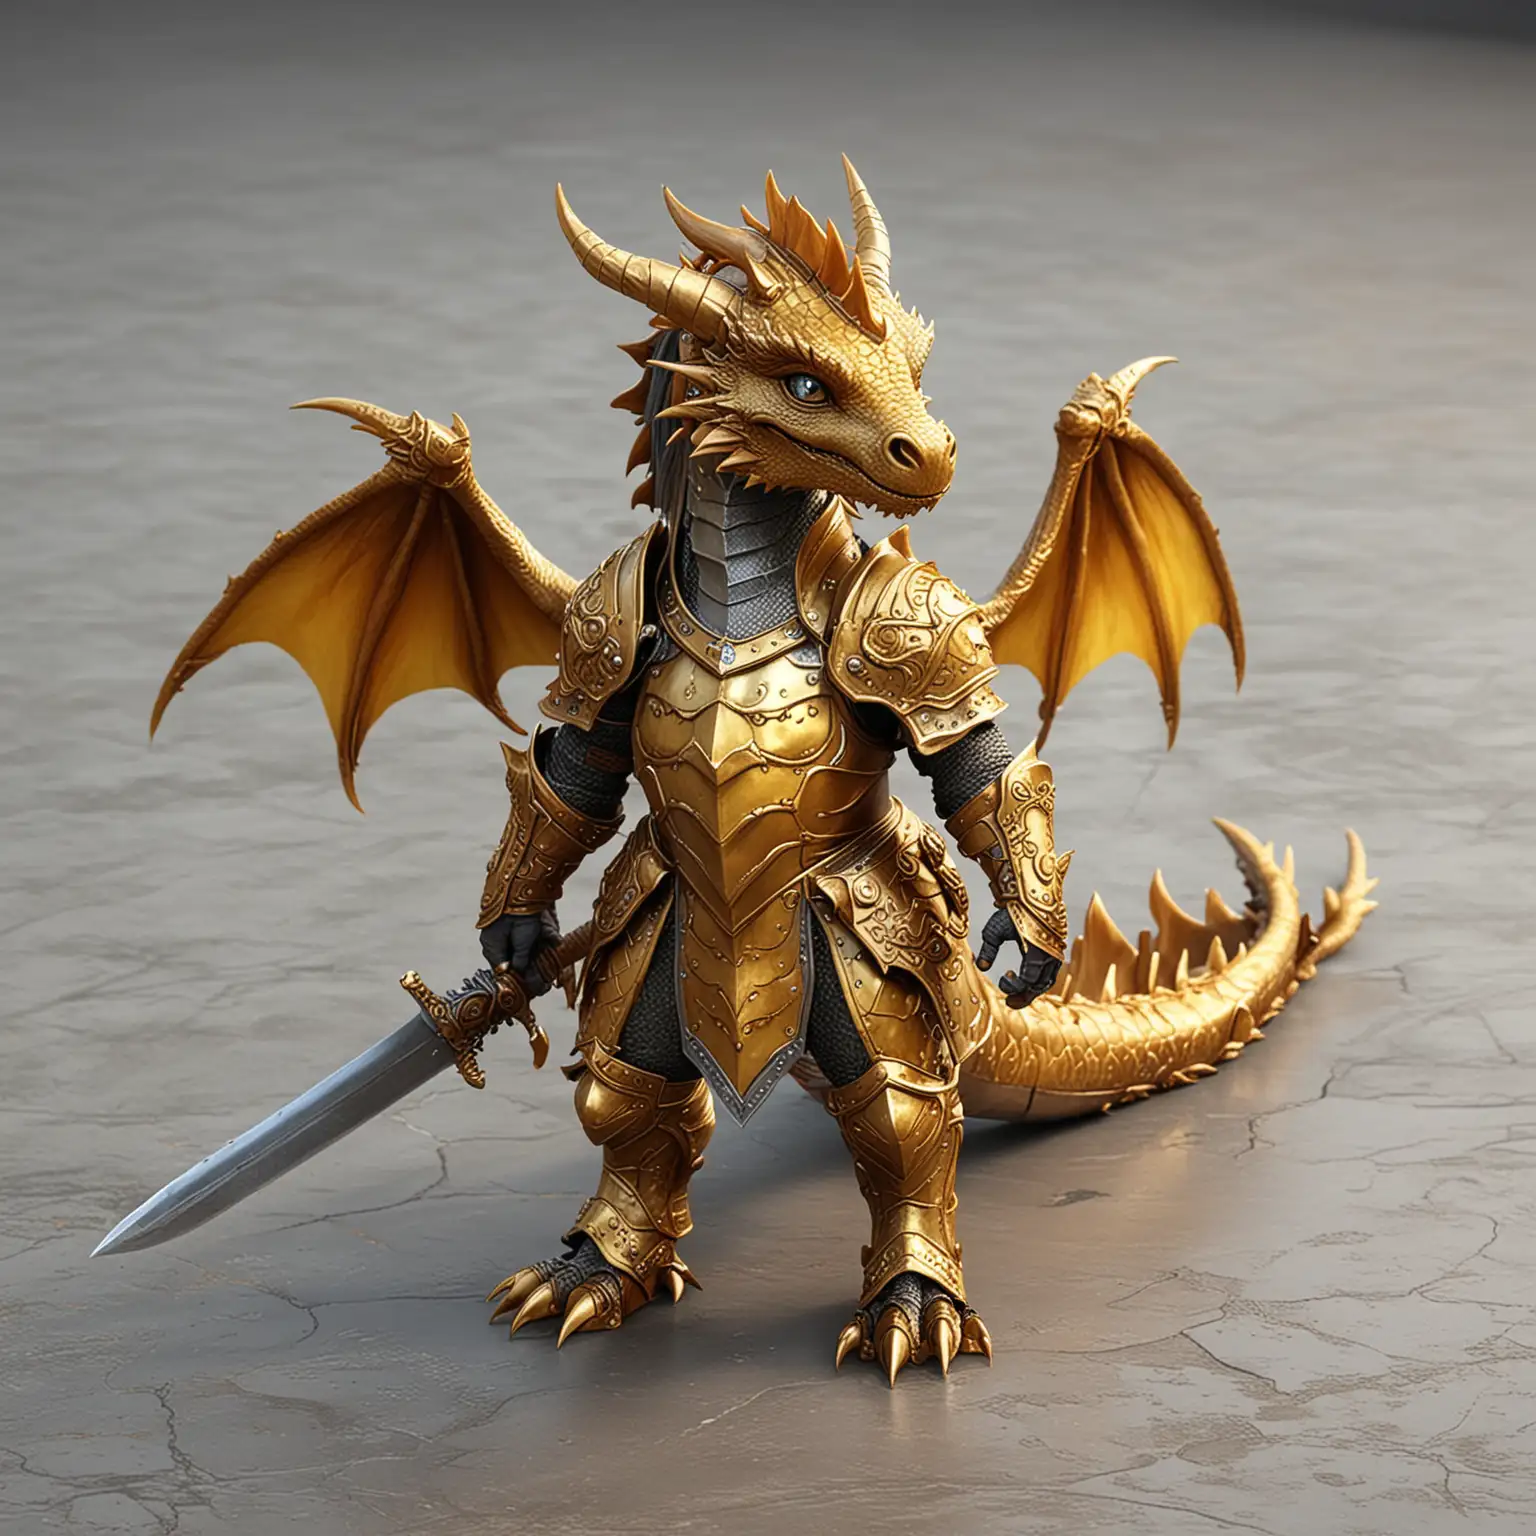 Colorful Golden Medieval Armor Dragon Knight Standing